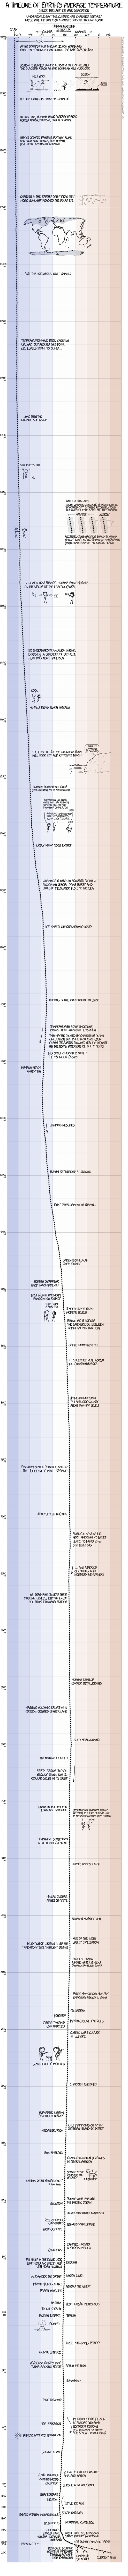 xkcd: timeline of earth's average temperature xkcd.com/1732/